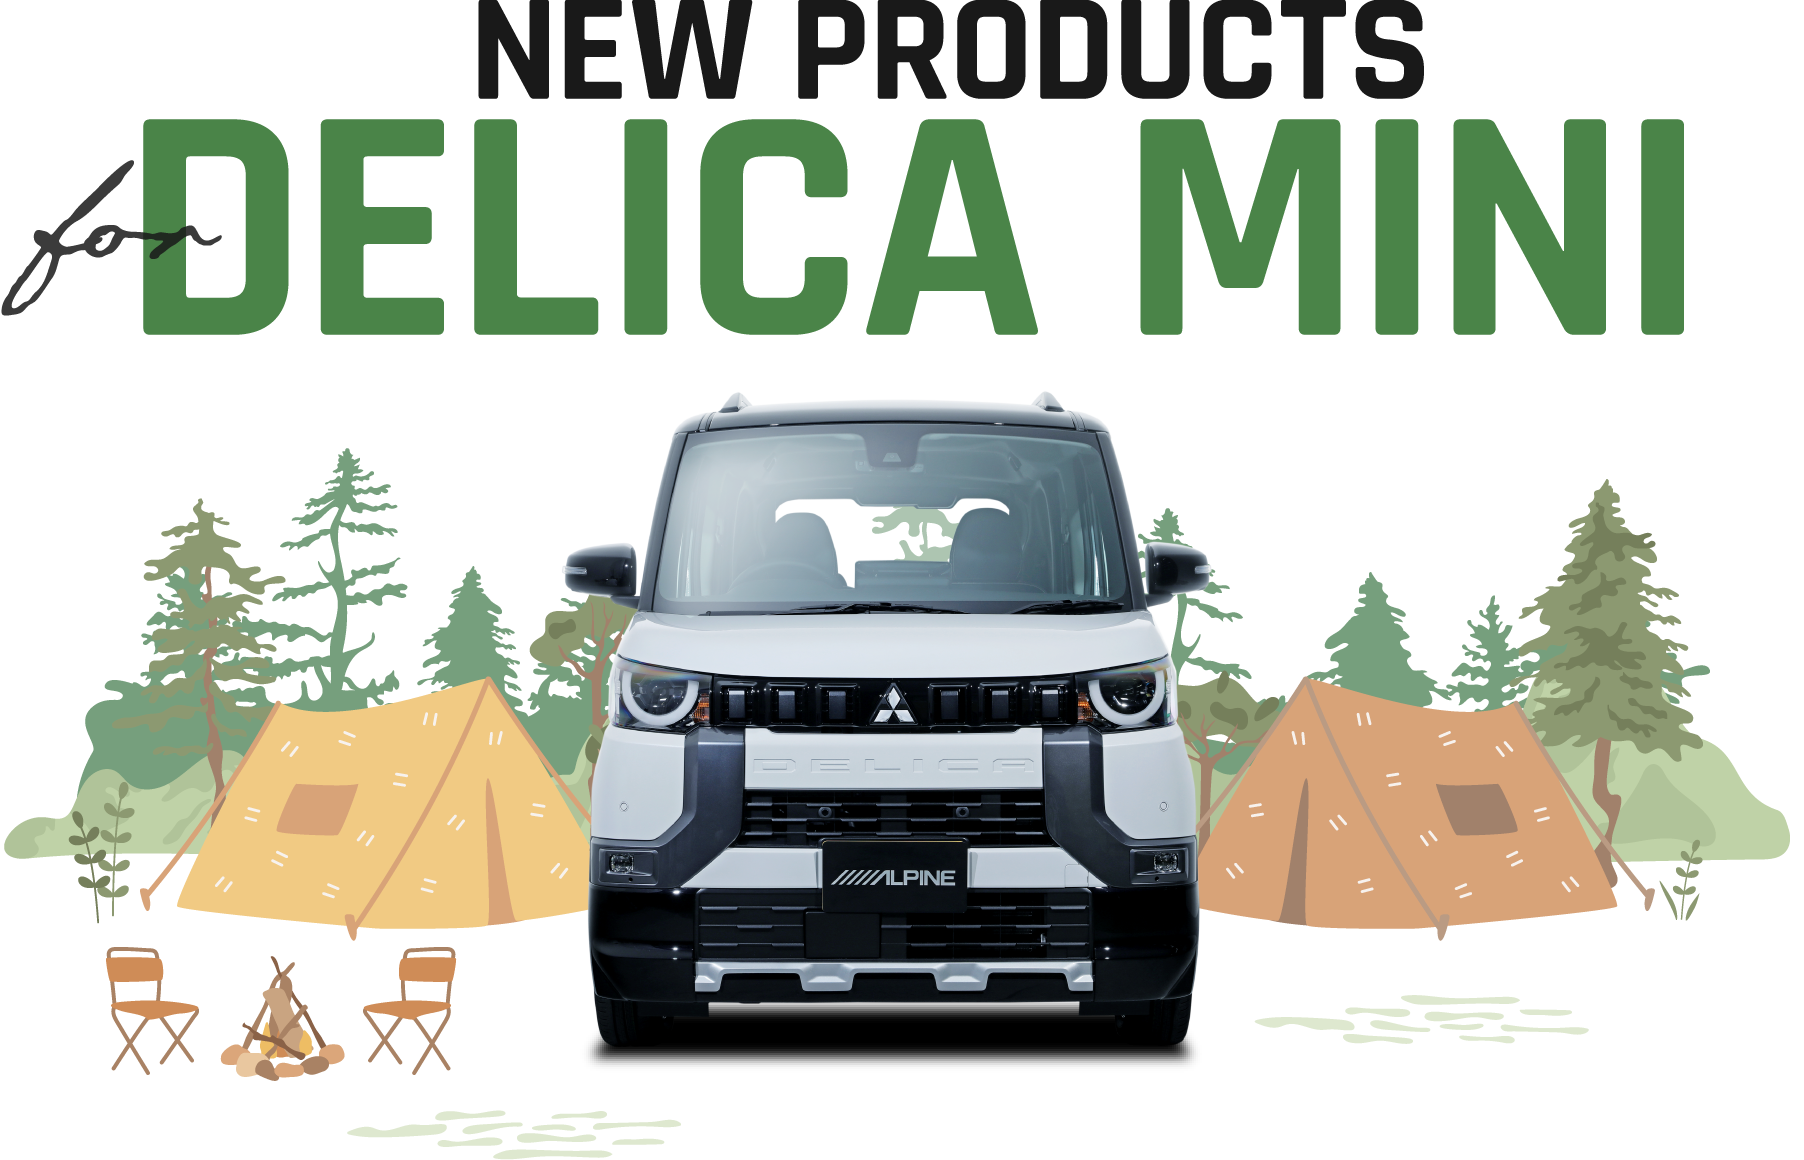 NEW PRODUCTS for DELICA MINI │ アルパイン製品でデリカミニをアップデート